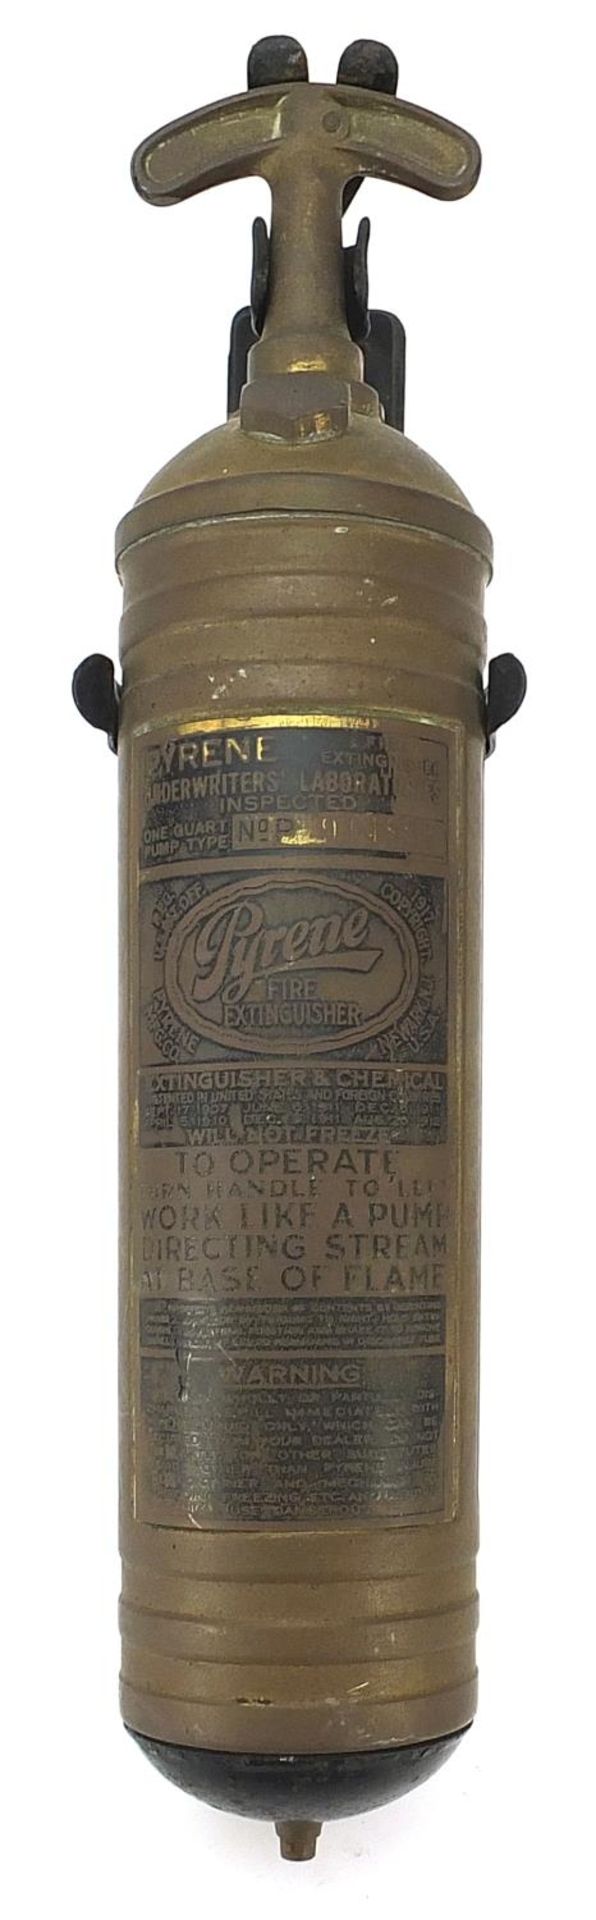 Vintage Pyrene fire extinguisher with wall mount, 37cm high